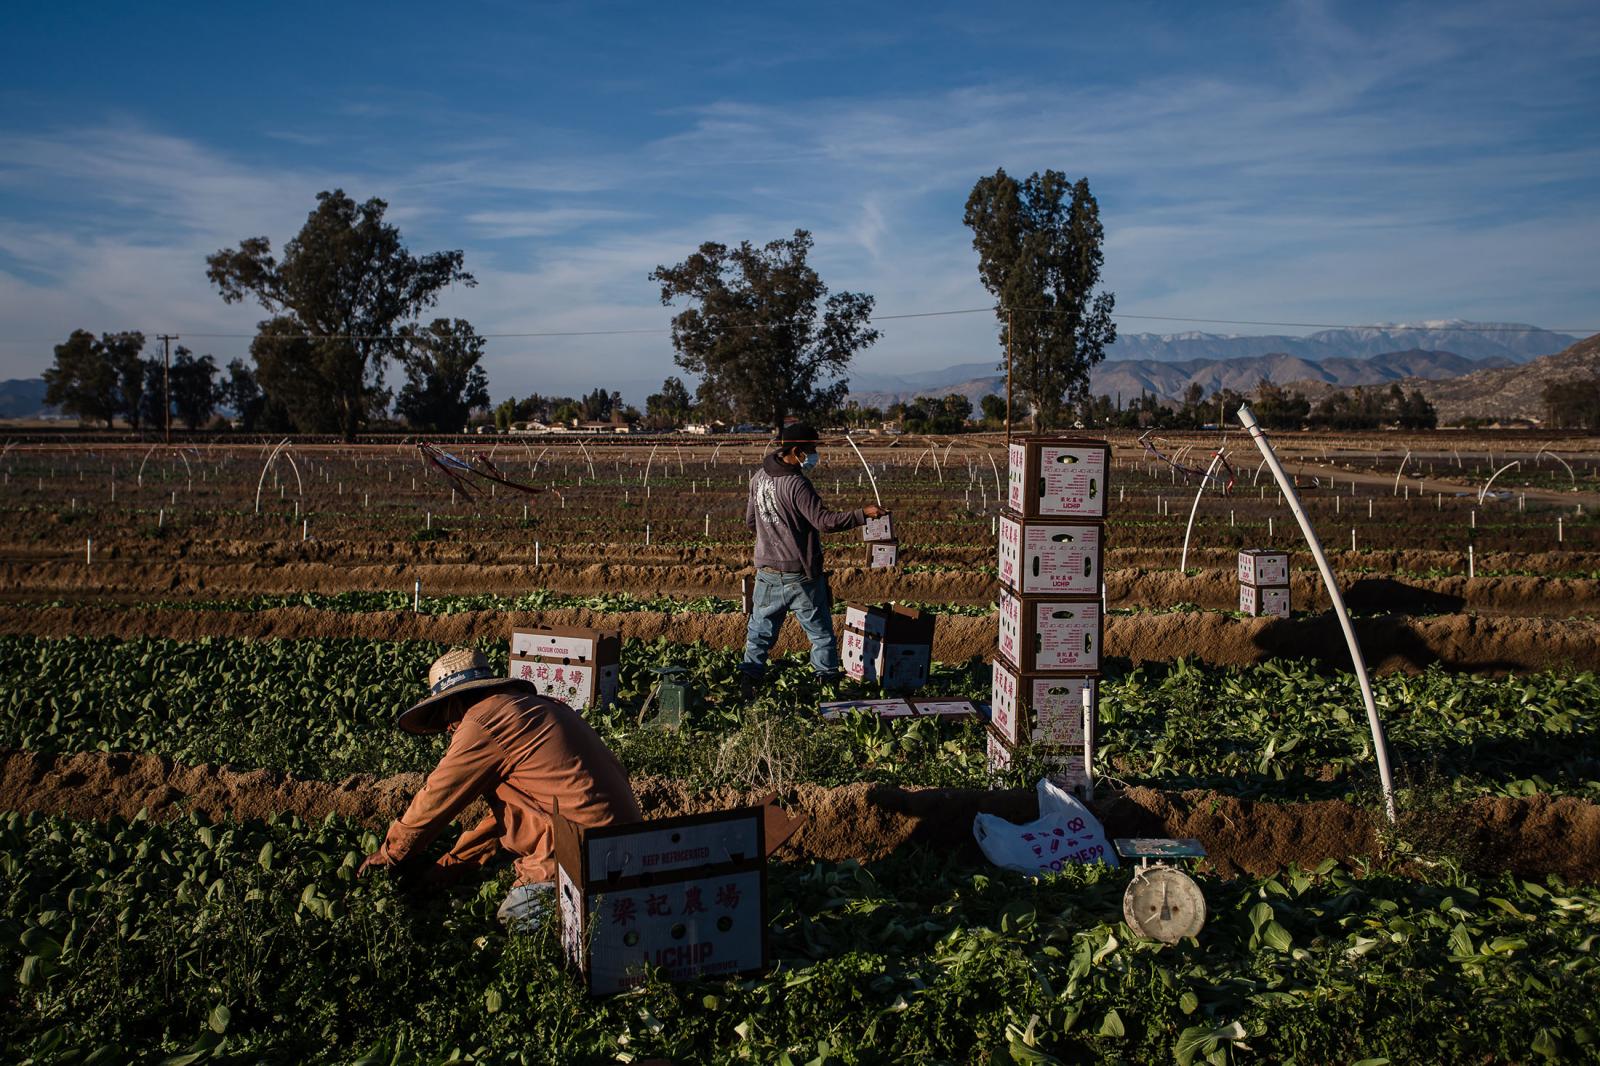 Farmworkers in Hemet, Riverside County, California on February 8, 2021. Riverside County is the first in the nation to prioritize Covid-19 vaccines for farmworkers.